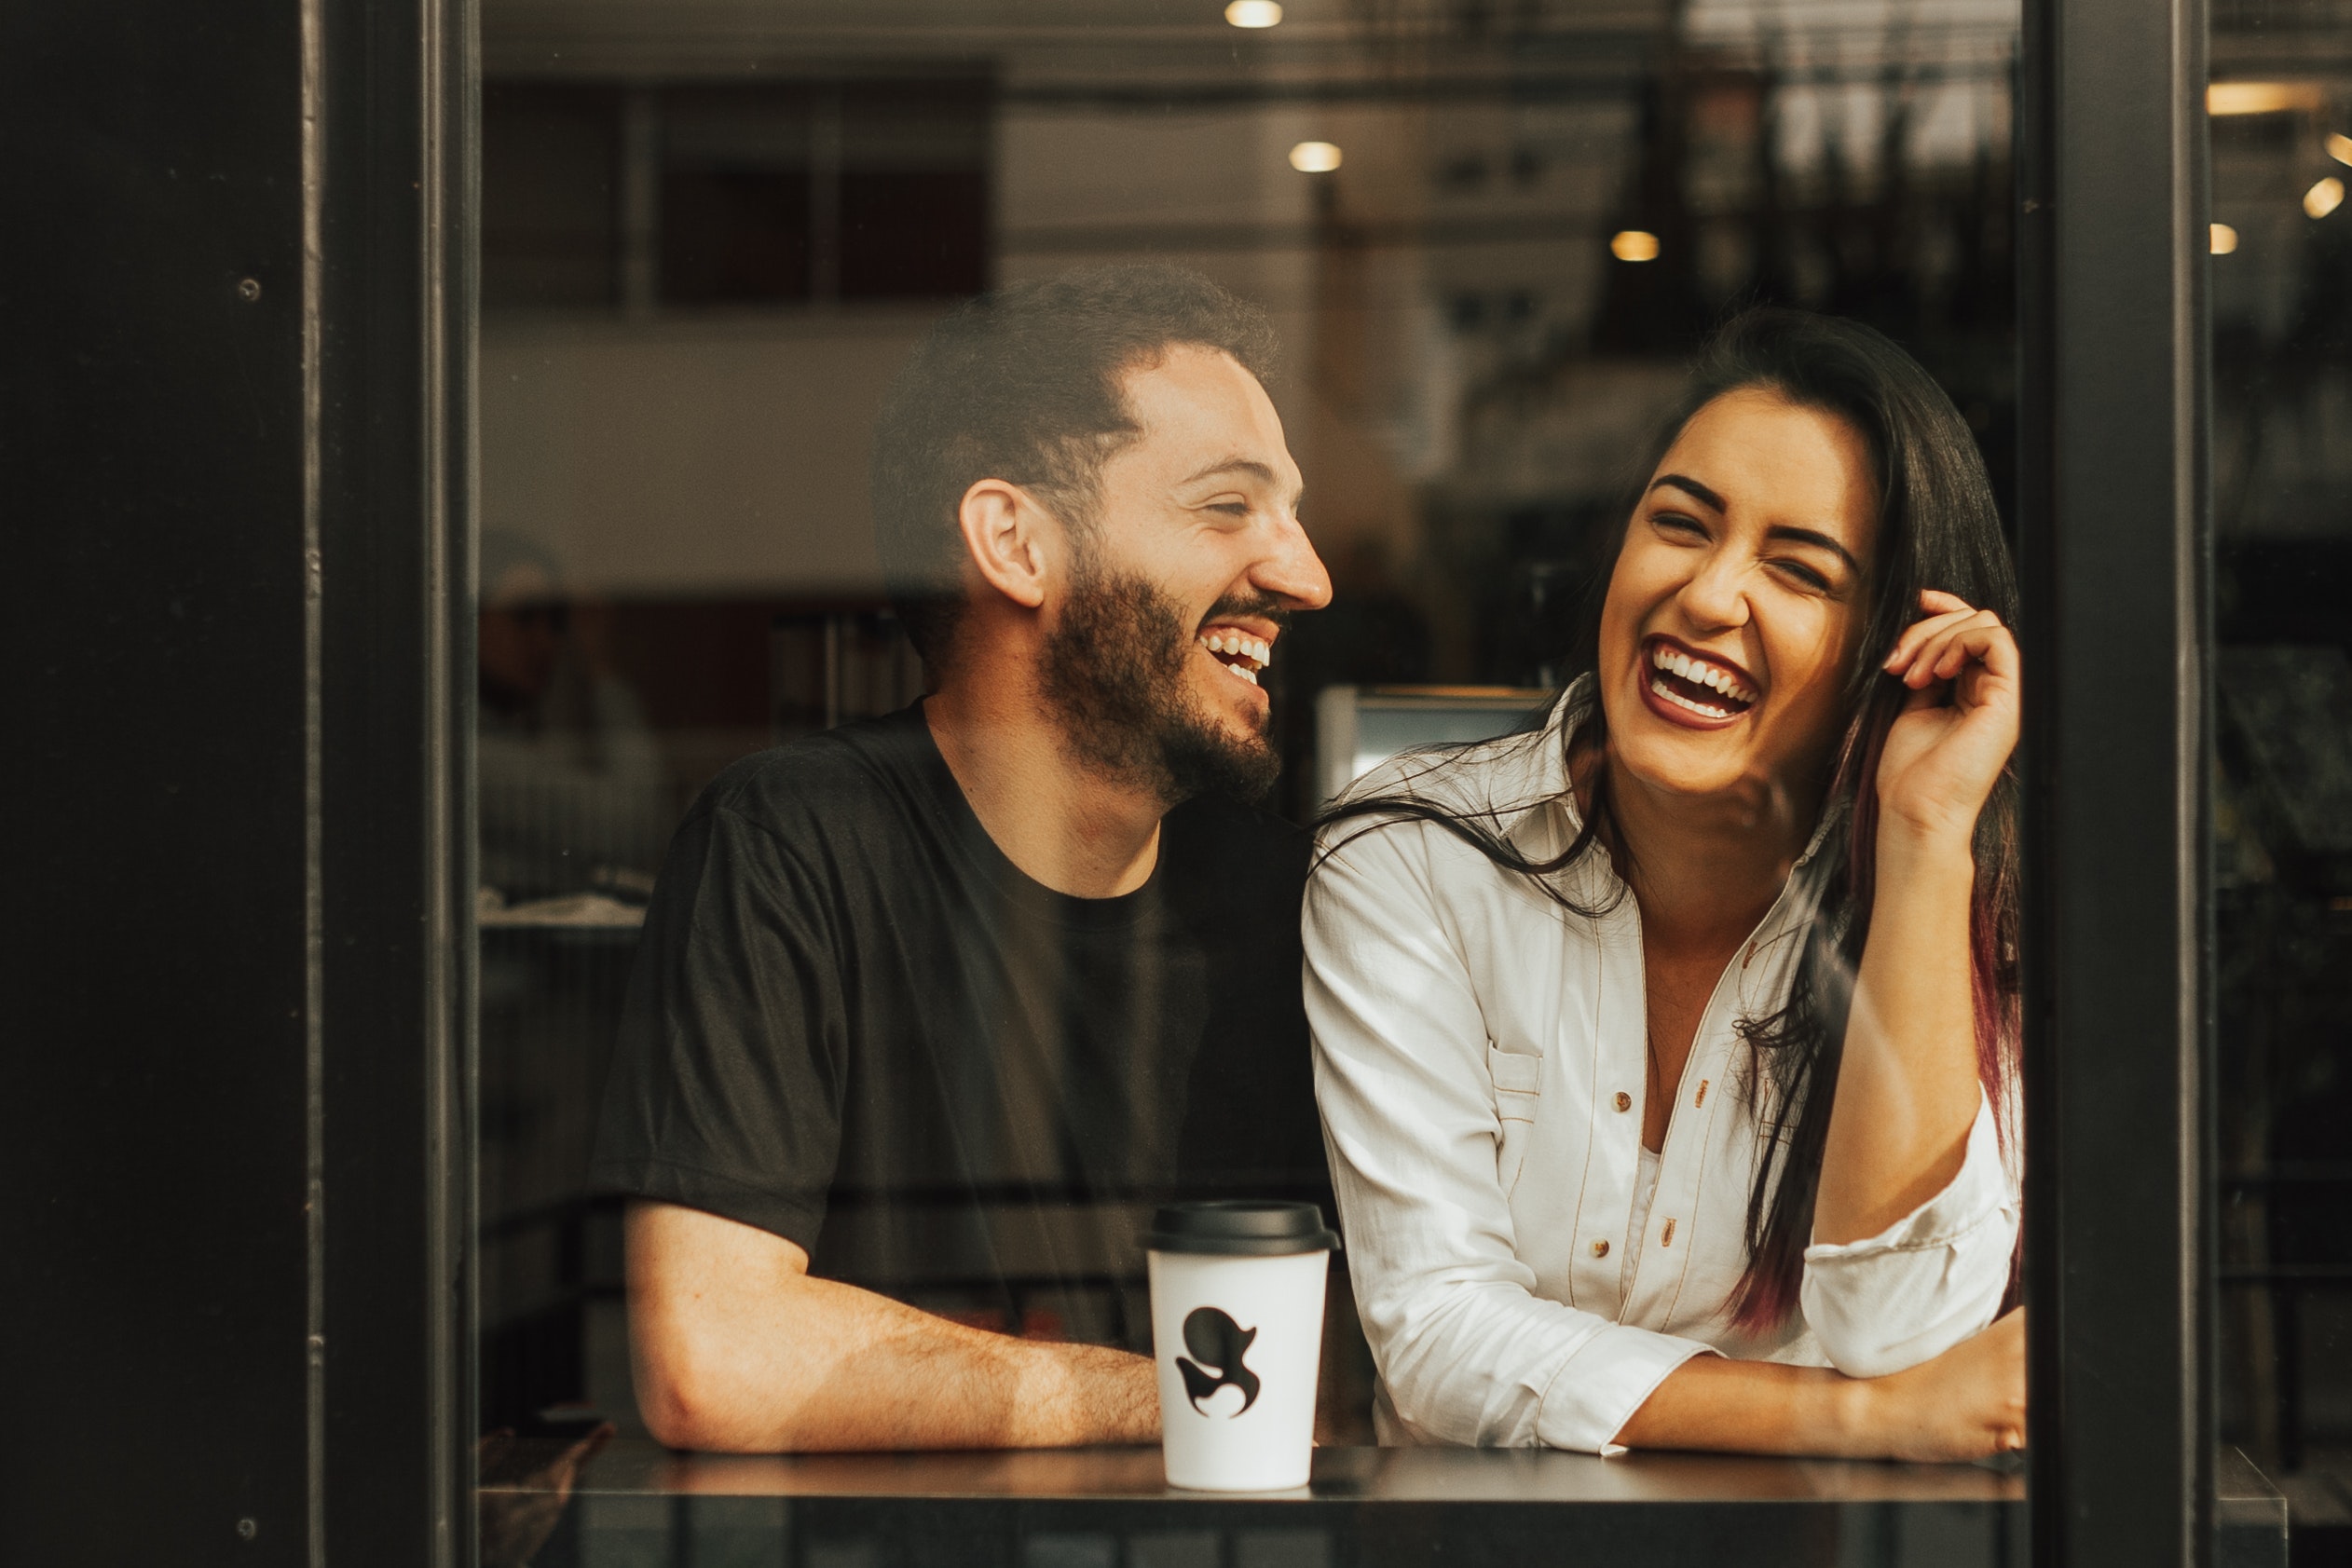 Photo of a laughing couple Sitting in a cafe. | Source: Pexels